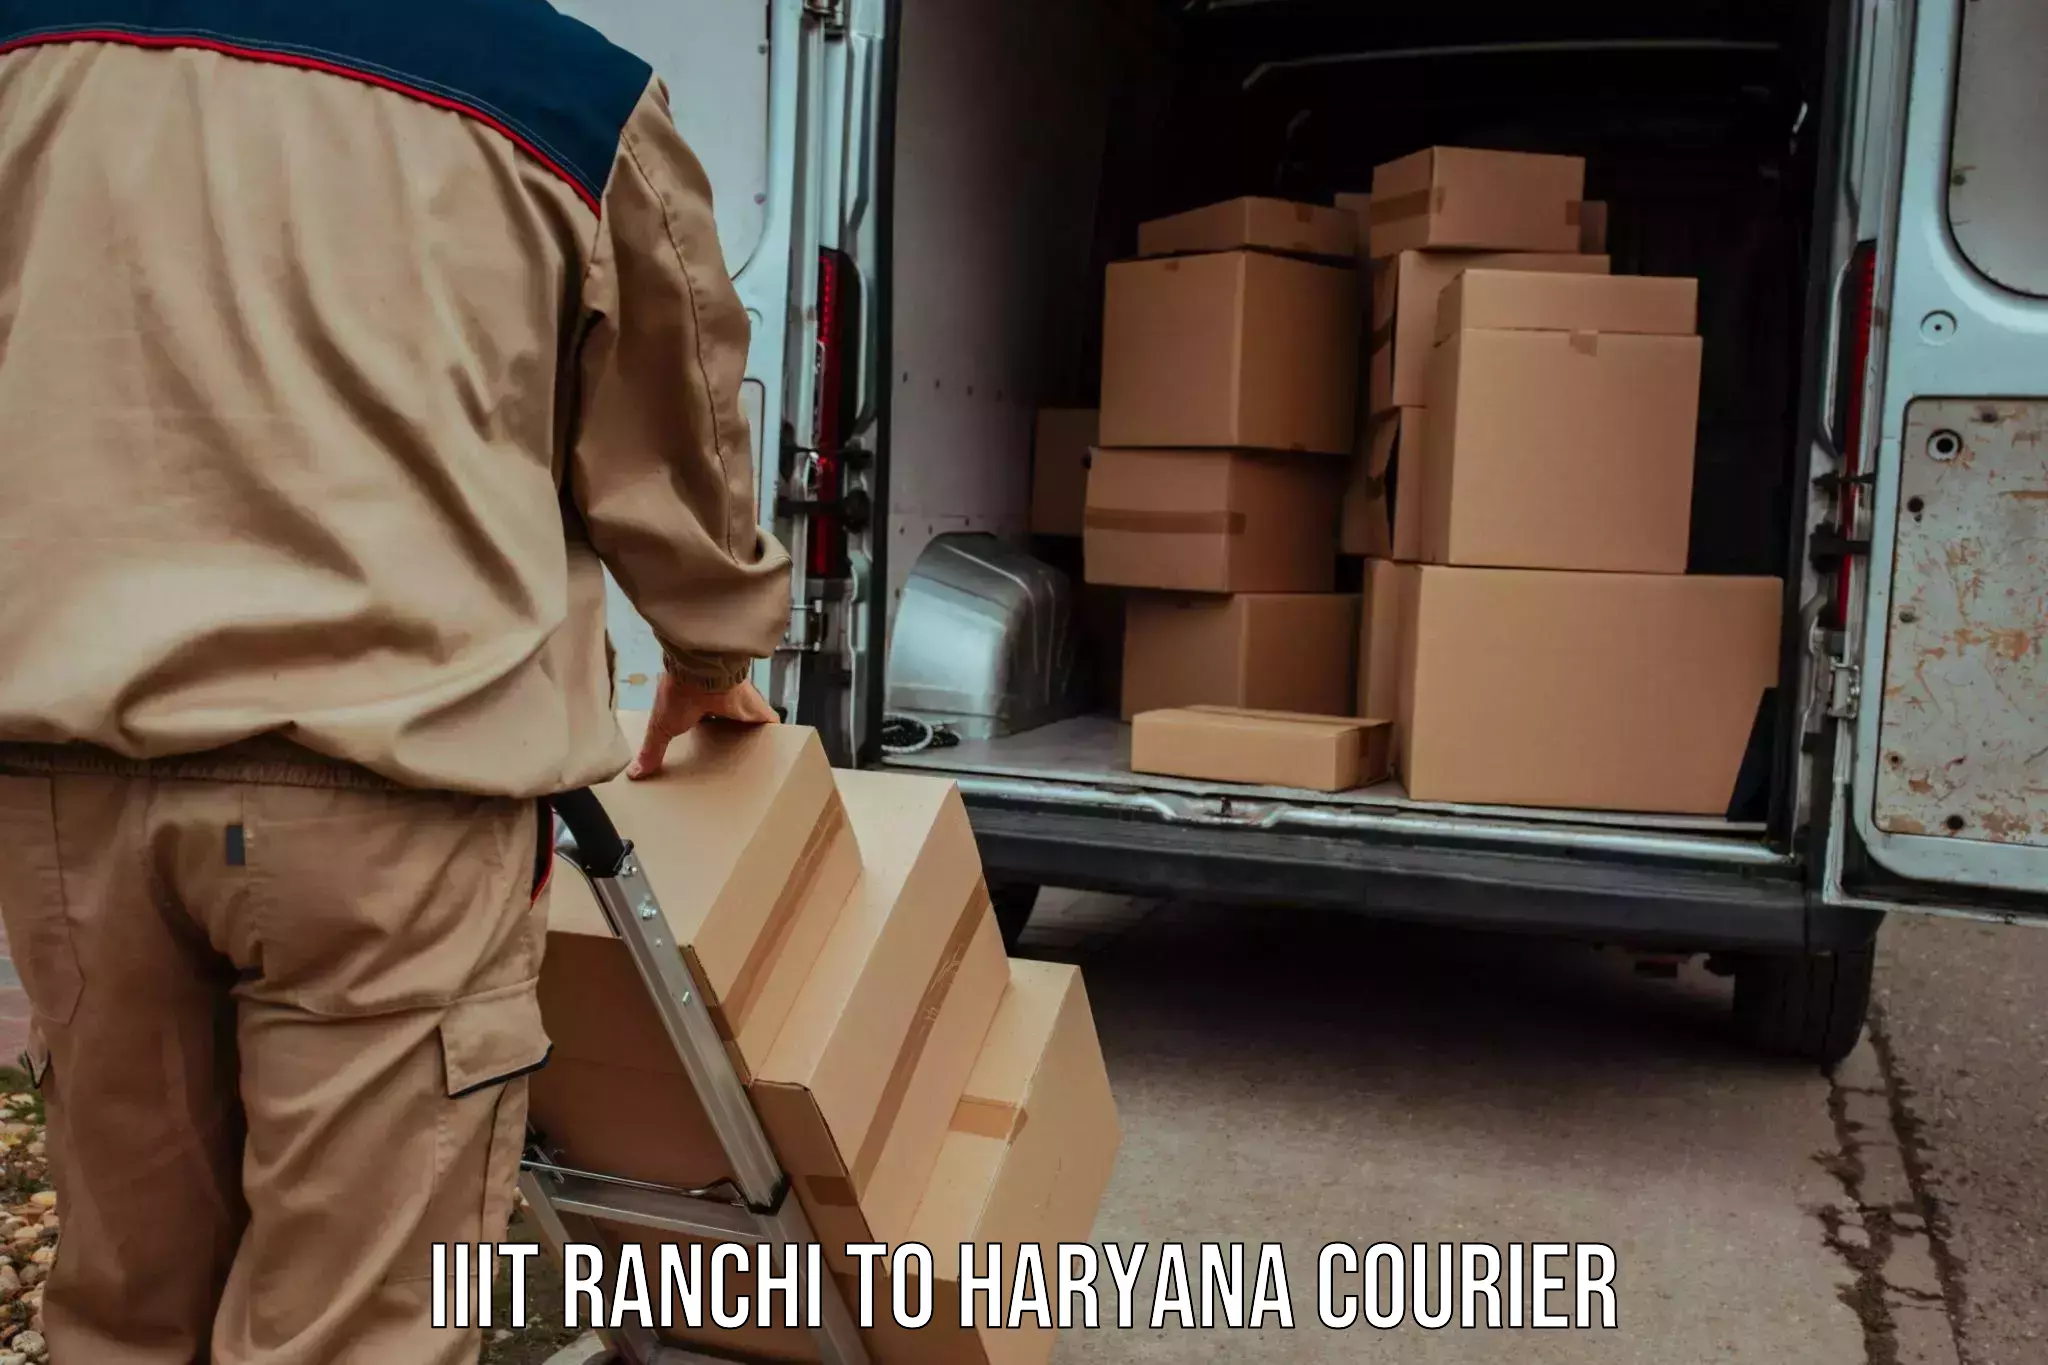 Reliable delivery network in IIIT Ranchi to Haryana